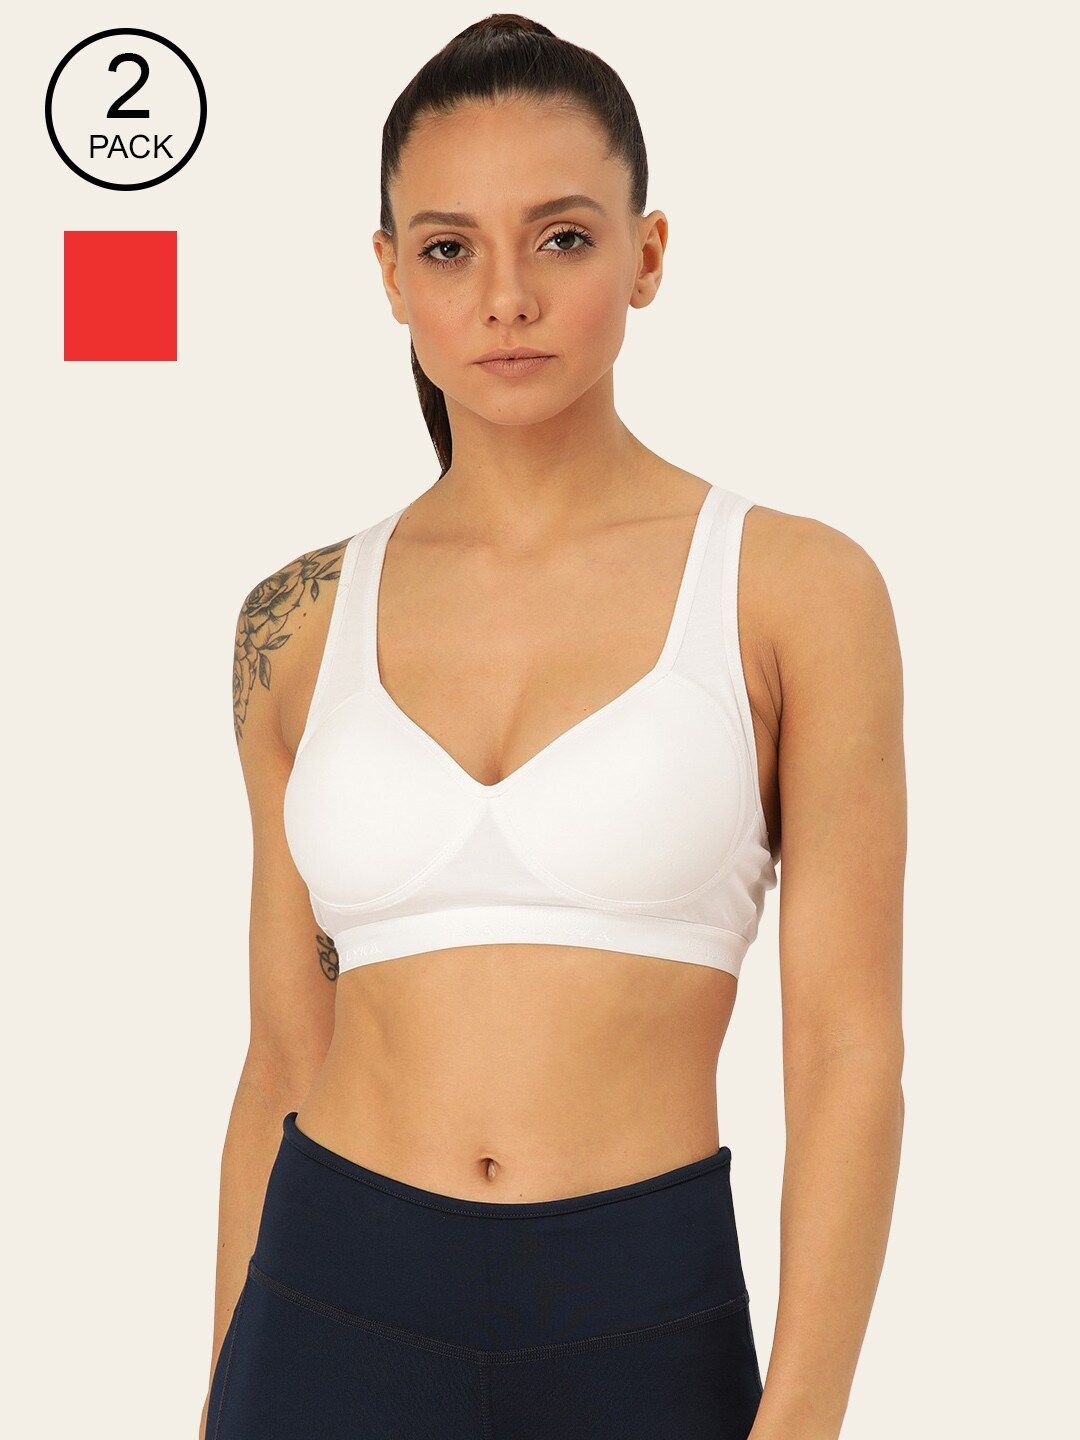 Lady Lyka Red & White Pack of 2 Workout Bra Half Coverage Lightly Padded Price in India